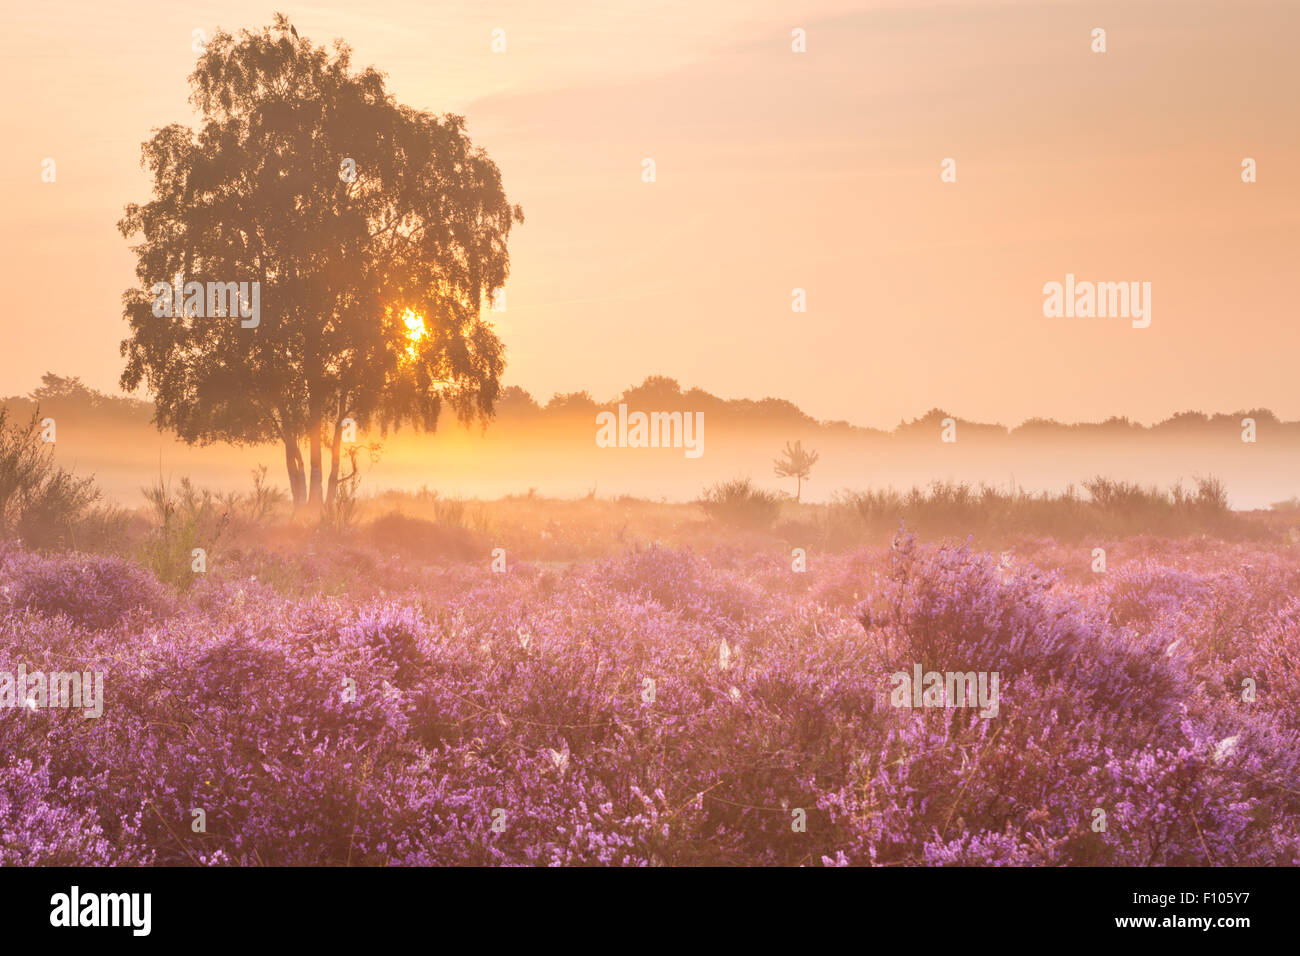 Blooming heather on a foggy morning at sunrise. Photographed near Hilversum in The Netherlands. Stock Photo